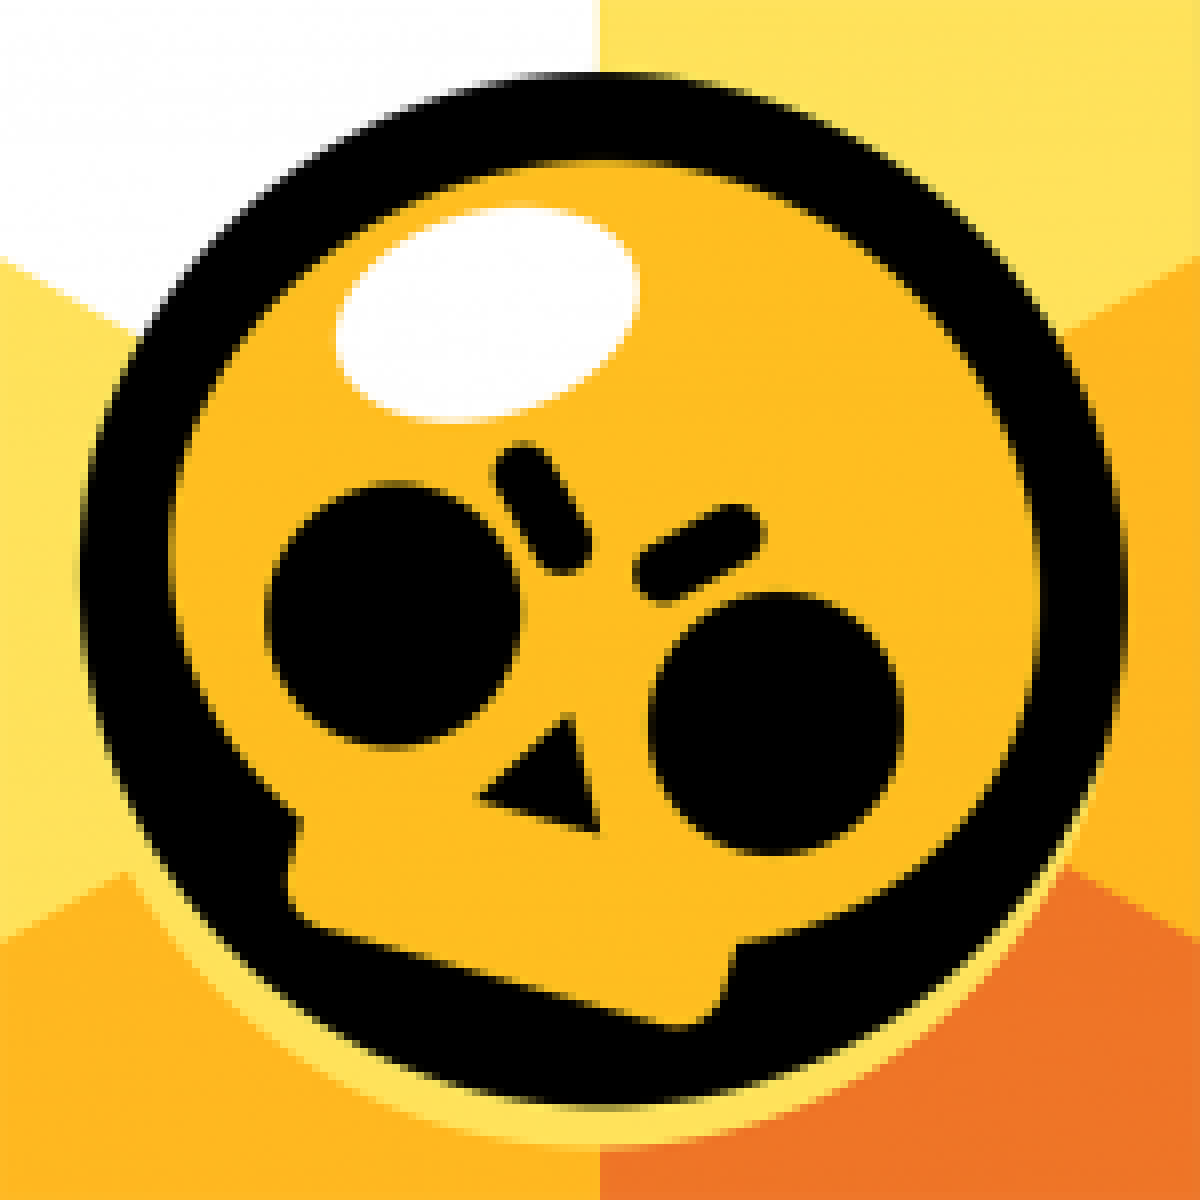 Brawl Stars Mod Apk 32 170 Unlimited Money Download Free For Android